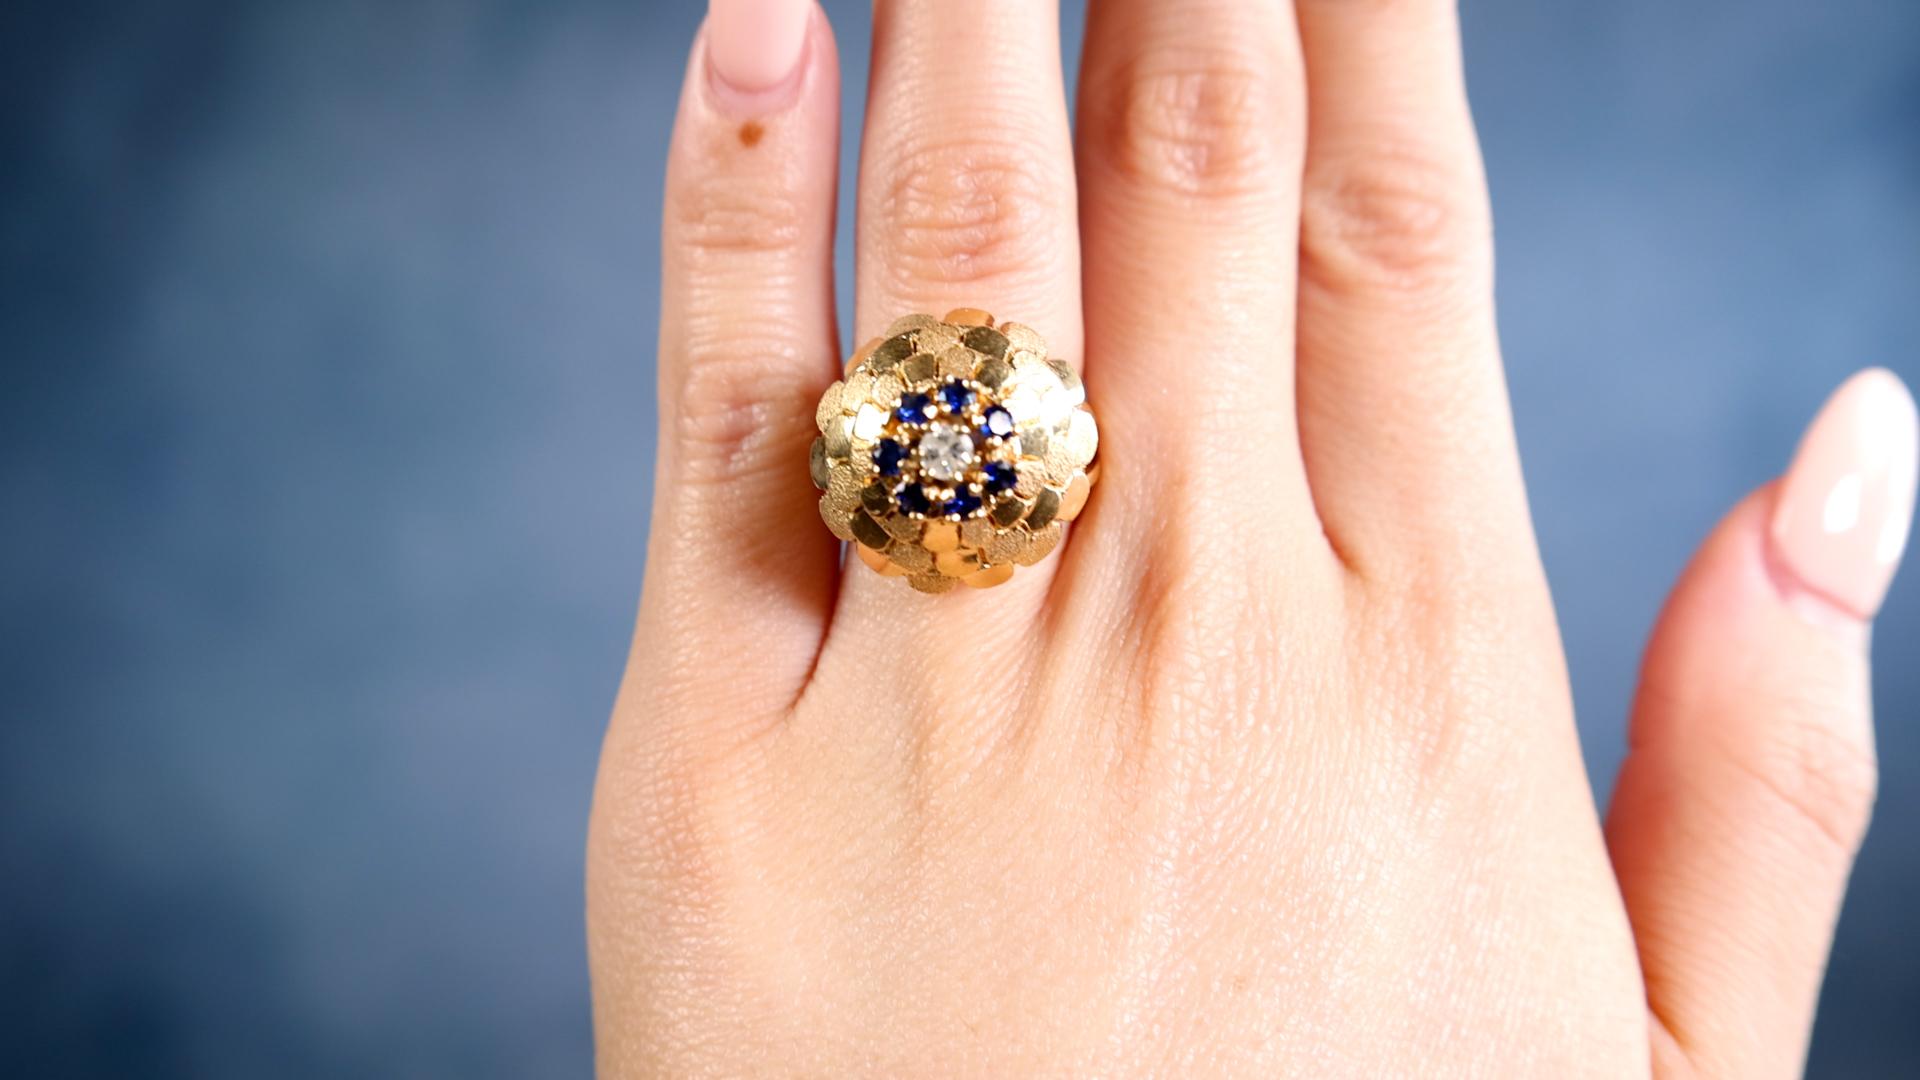 One Mid-Century Diamond Sapphire 18k Yellow Gold Cocktail Ring. Featuring one round brilliant cut diamond weighing approximately 0.15 carat, graded J color, I1 clarity. Accented by seven round brilliant cut sapphires with a total weight of